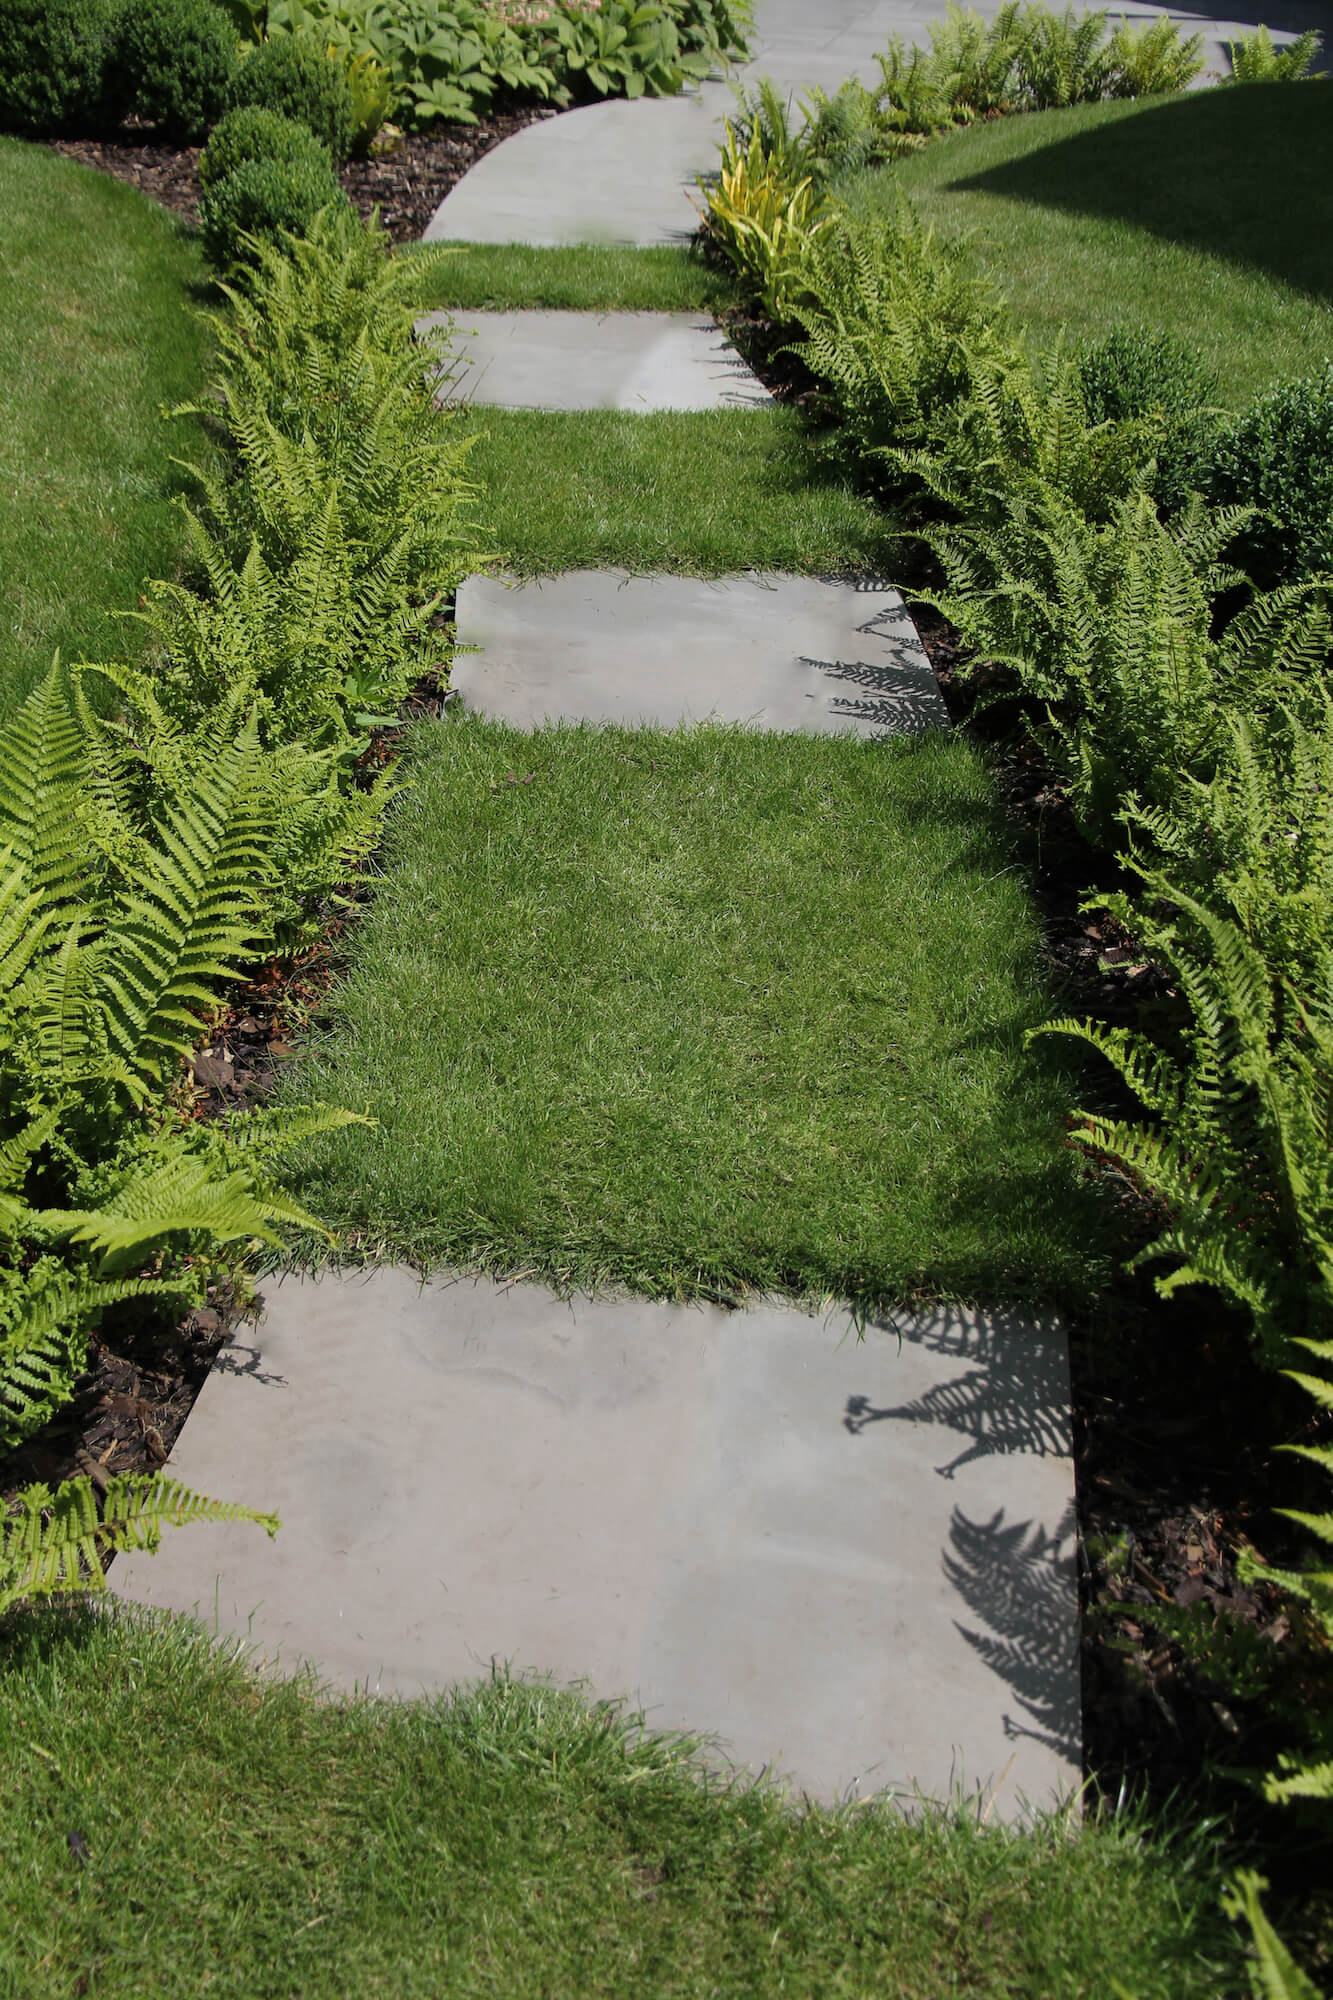 Stepping stones through garden path, with border of ferns